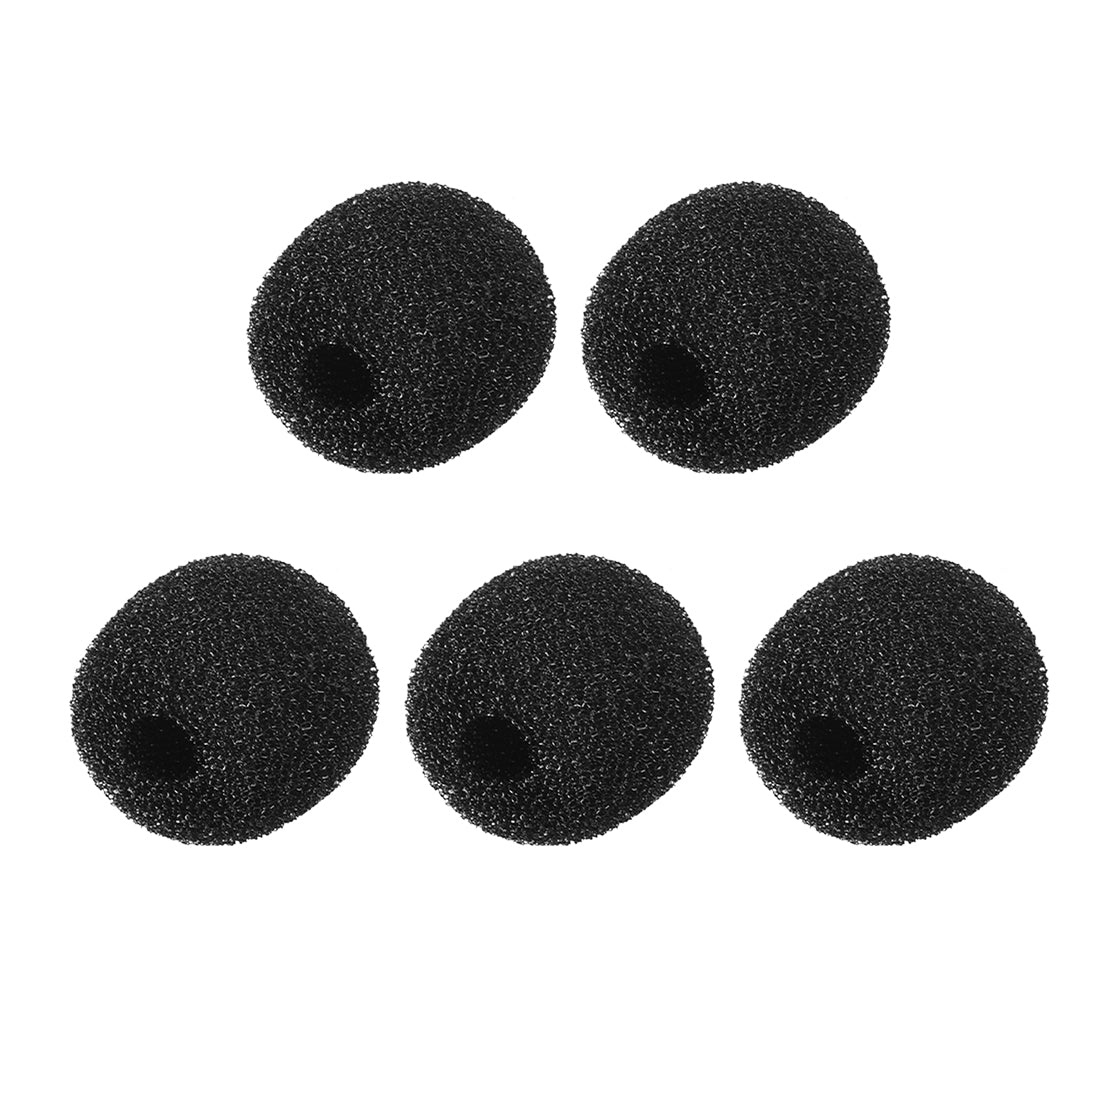 uxcell Uxcell 5PCS Foam Mic Cover Headset Microphone Windscreen Shield Protection Black 14.5mm Length for Headset Lapel Lavalier